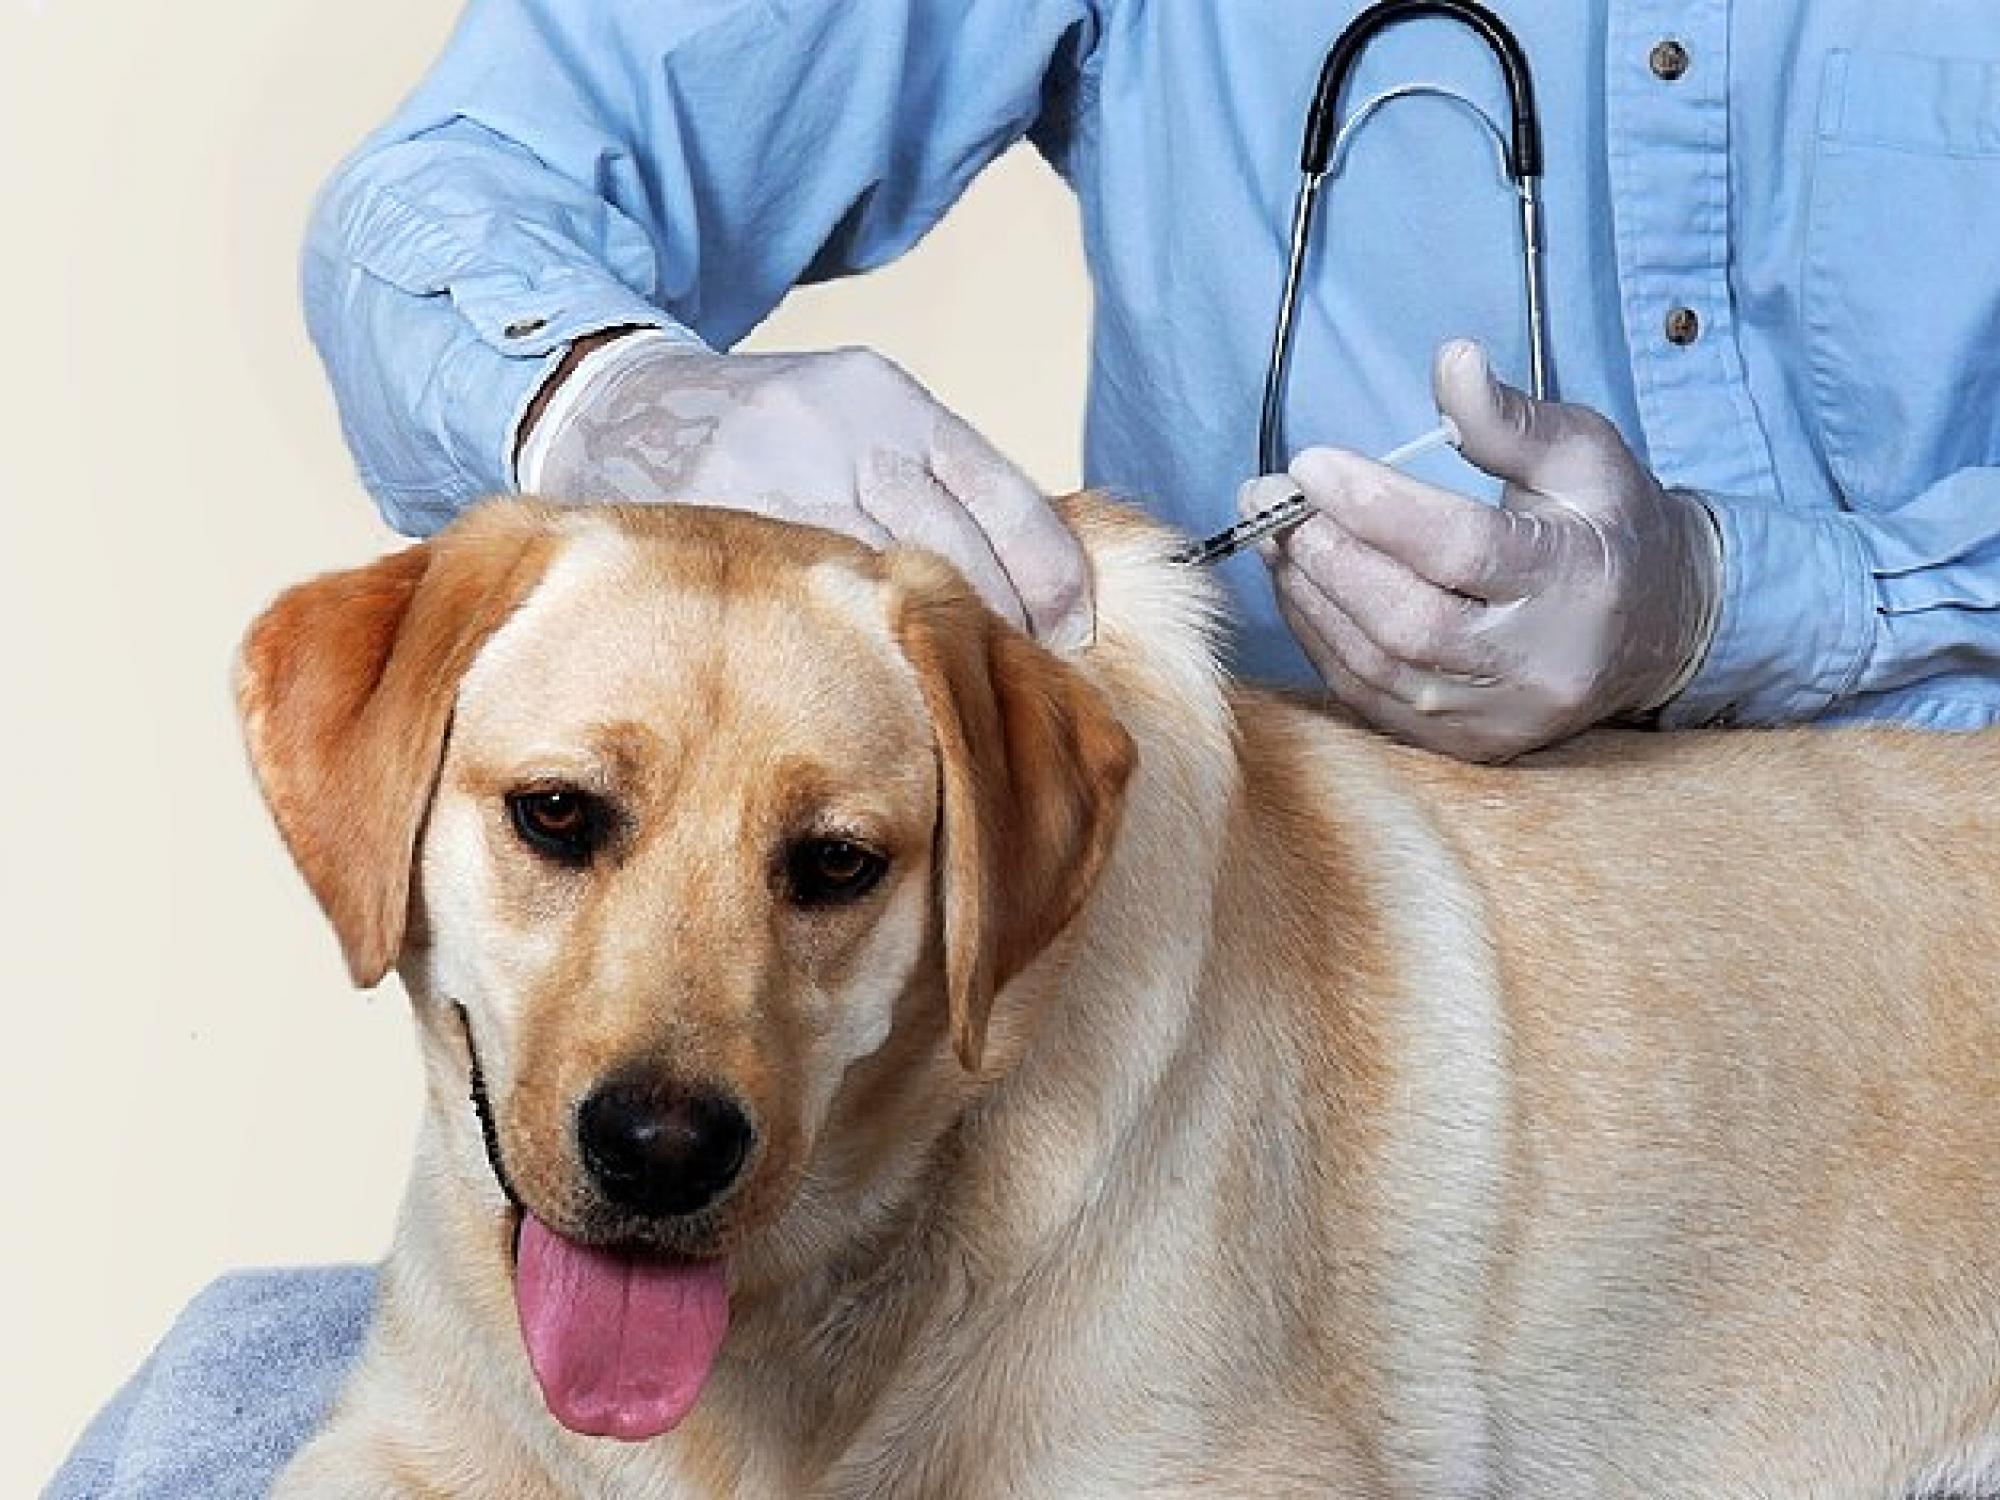 DHHS Announces An Upcoming Animal Rabies Immunization Clinic